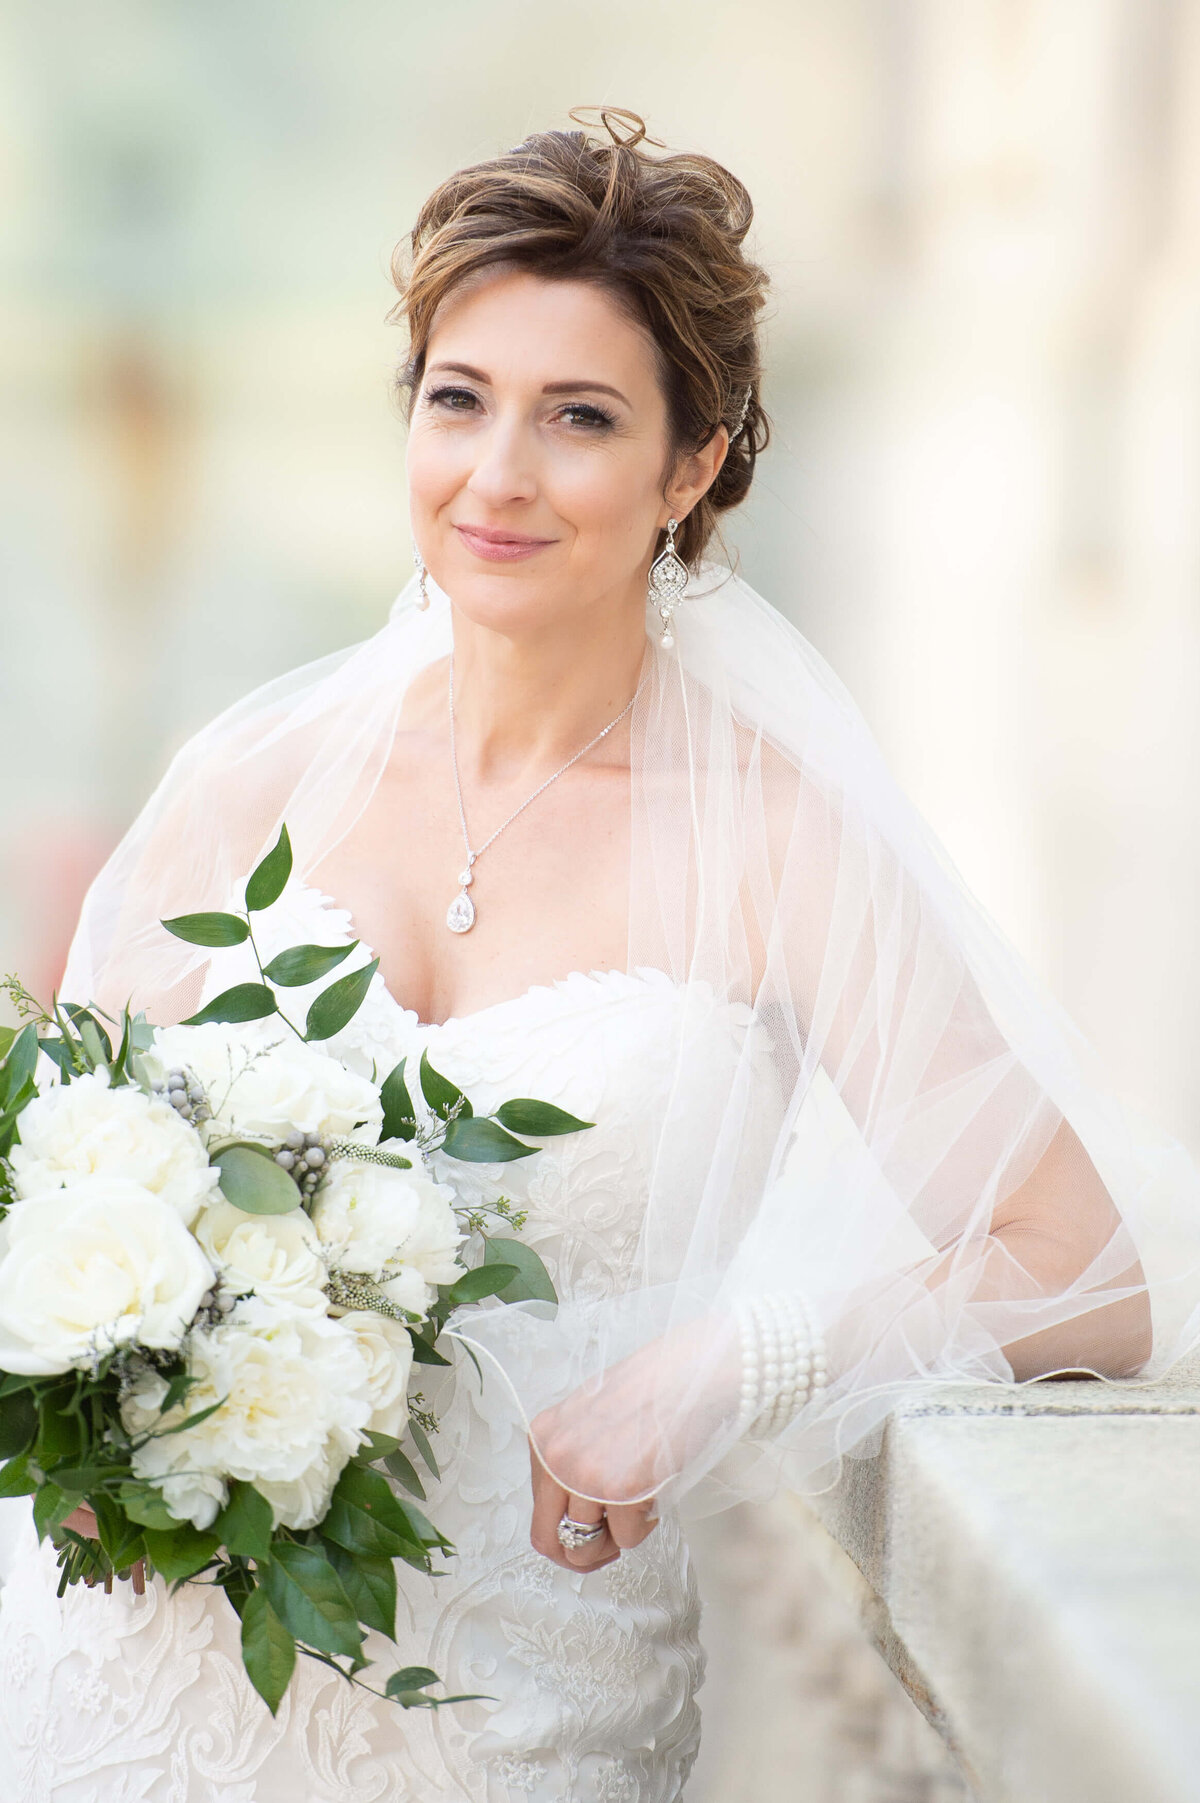 stunning portrait of a mature bride holding her bouquet outside the Chateau Laurier hotel.  Captured by Ottawa wedding photographer JEMMAN Photography